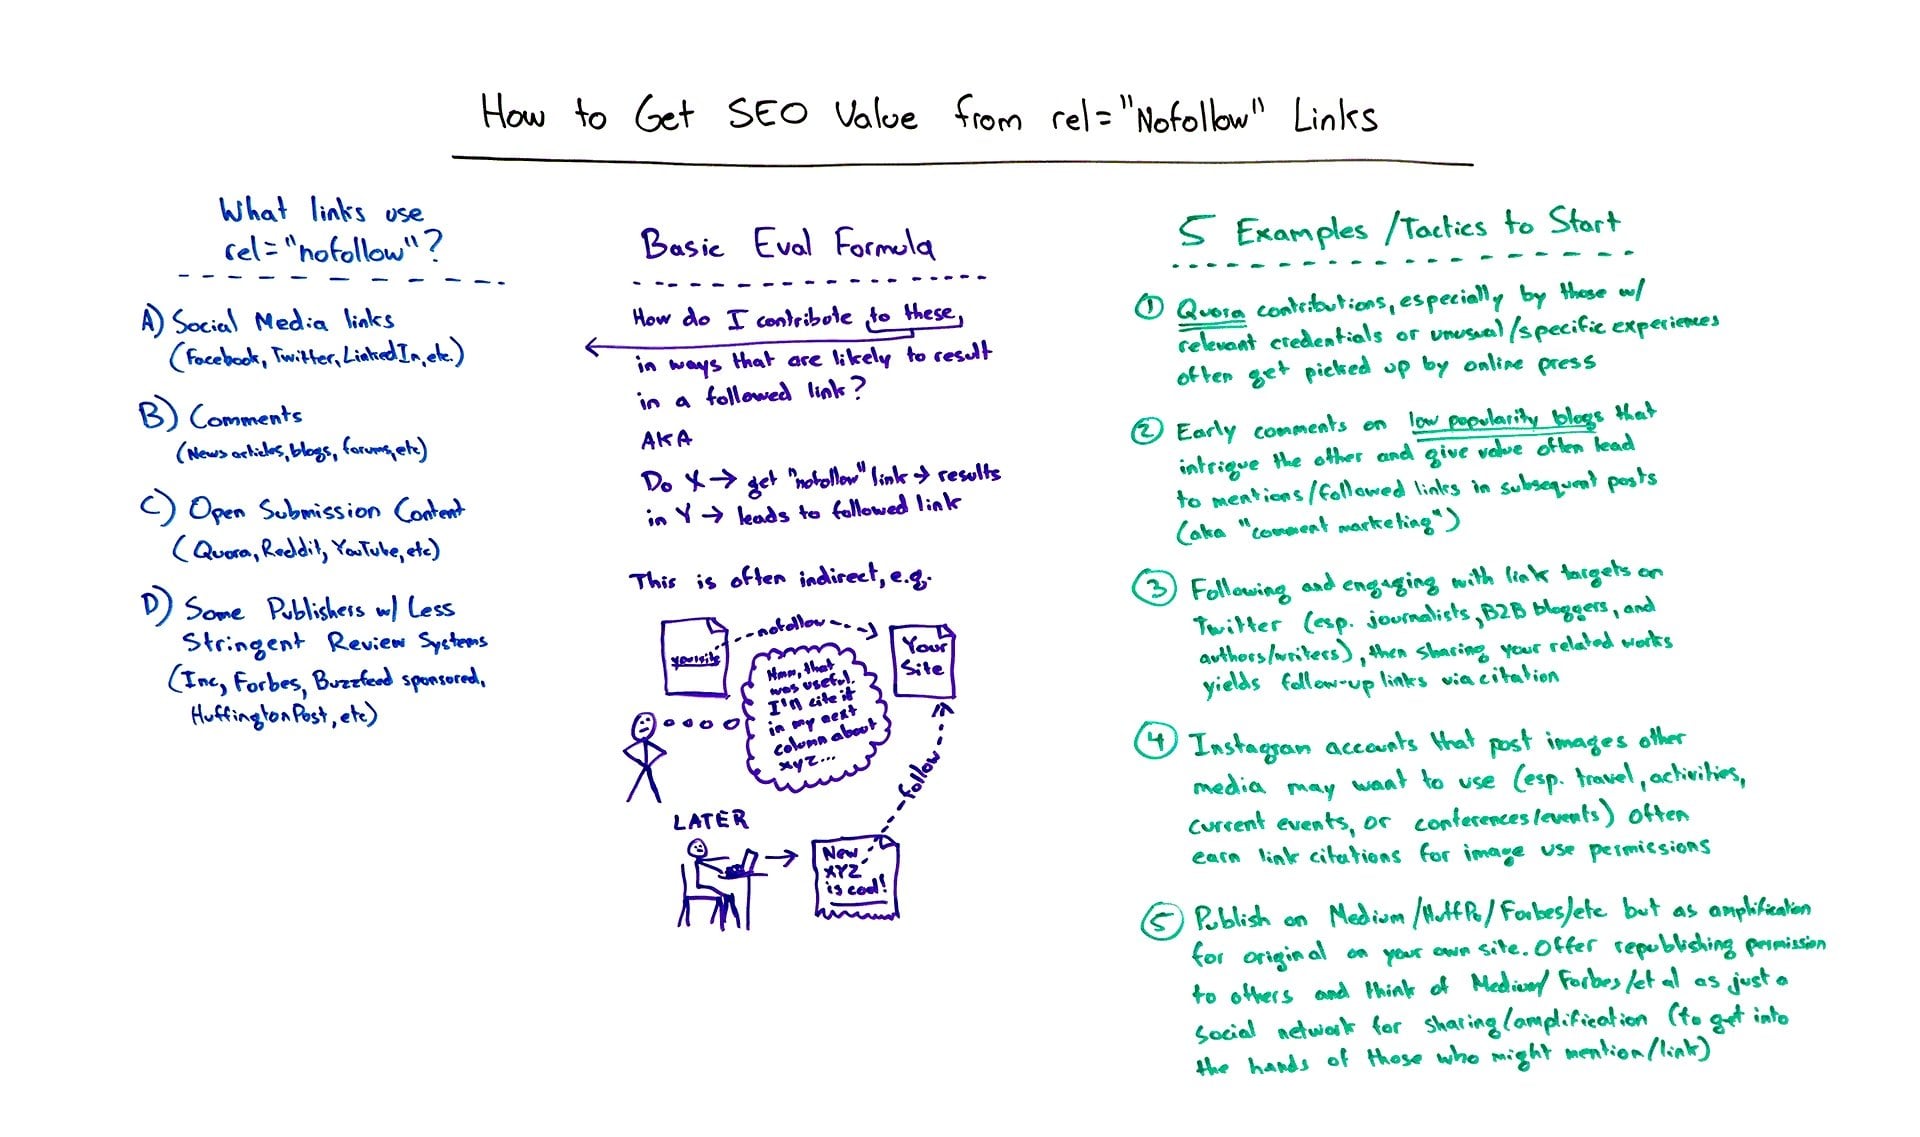 How to Gain SEO Value from NoFollow Links